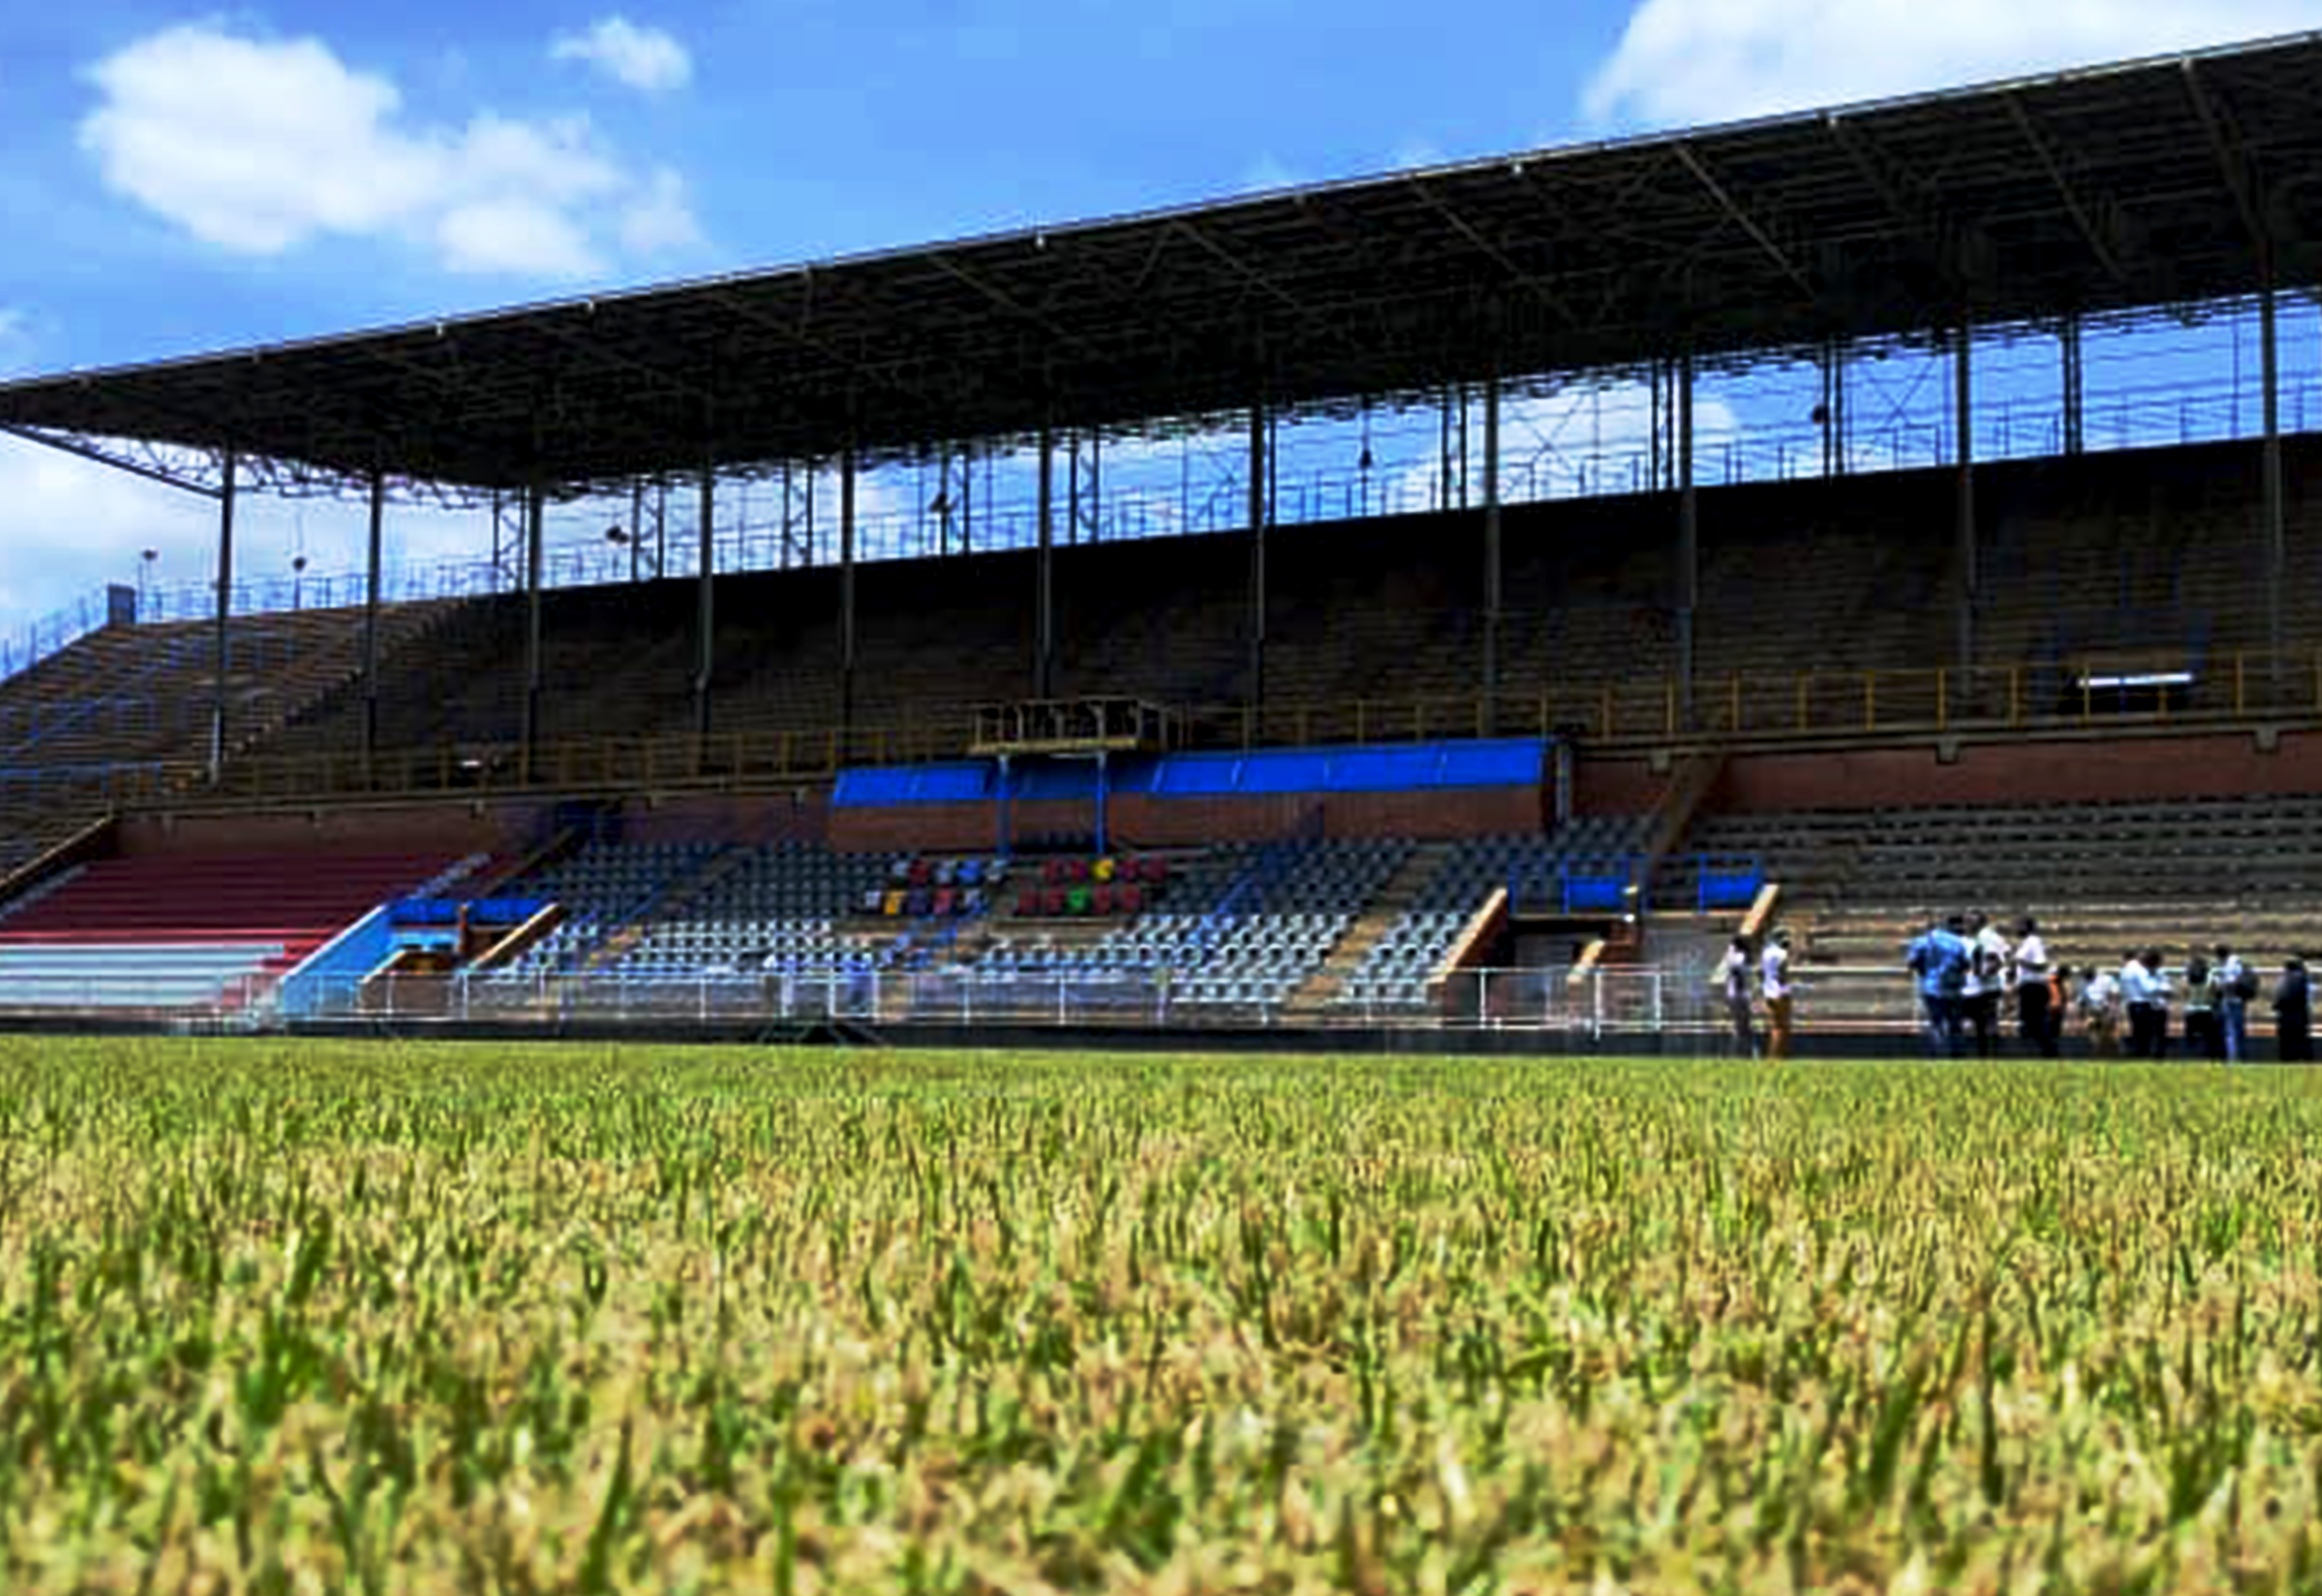 FIFTH TIME LUCKY! Mafume promises not to mess up umpteenth chance to reopen Rufaro Stadium